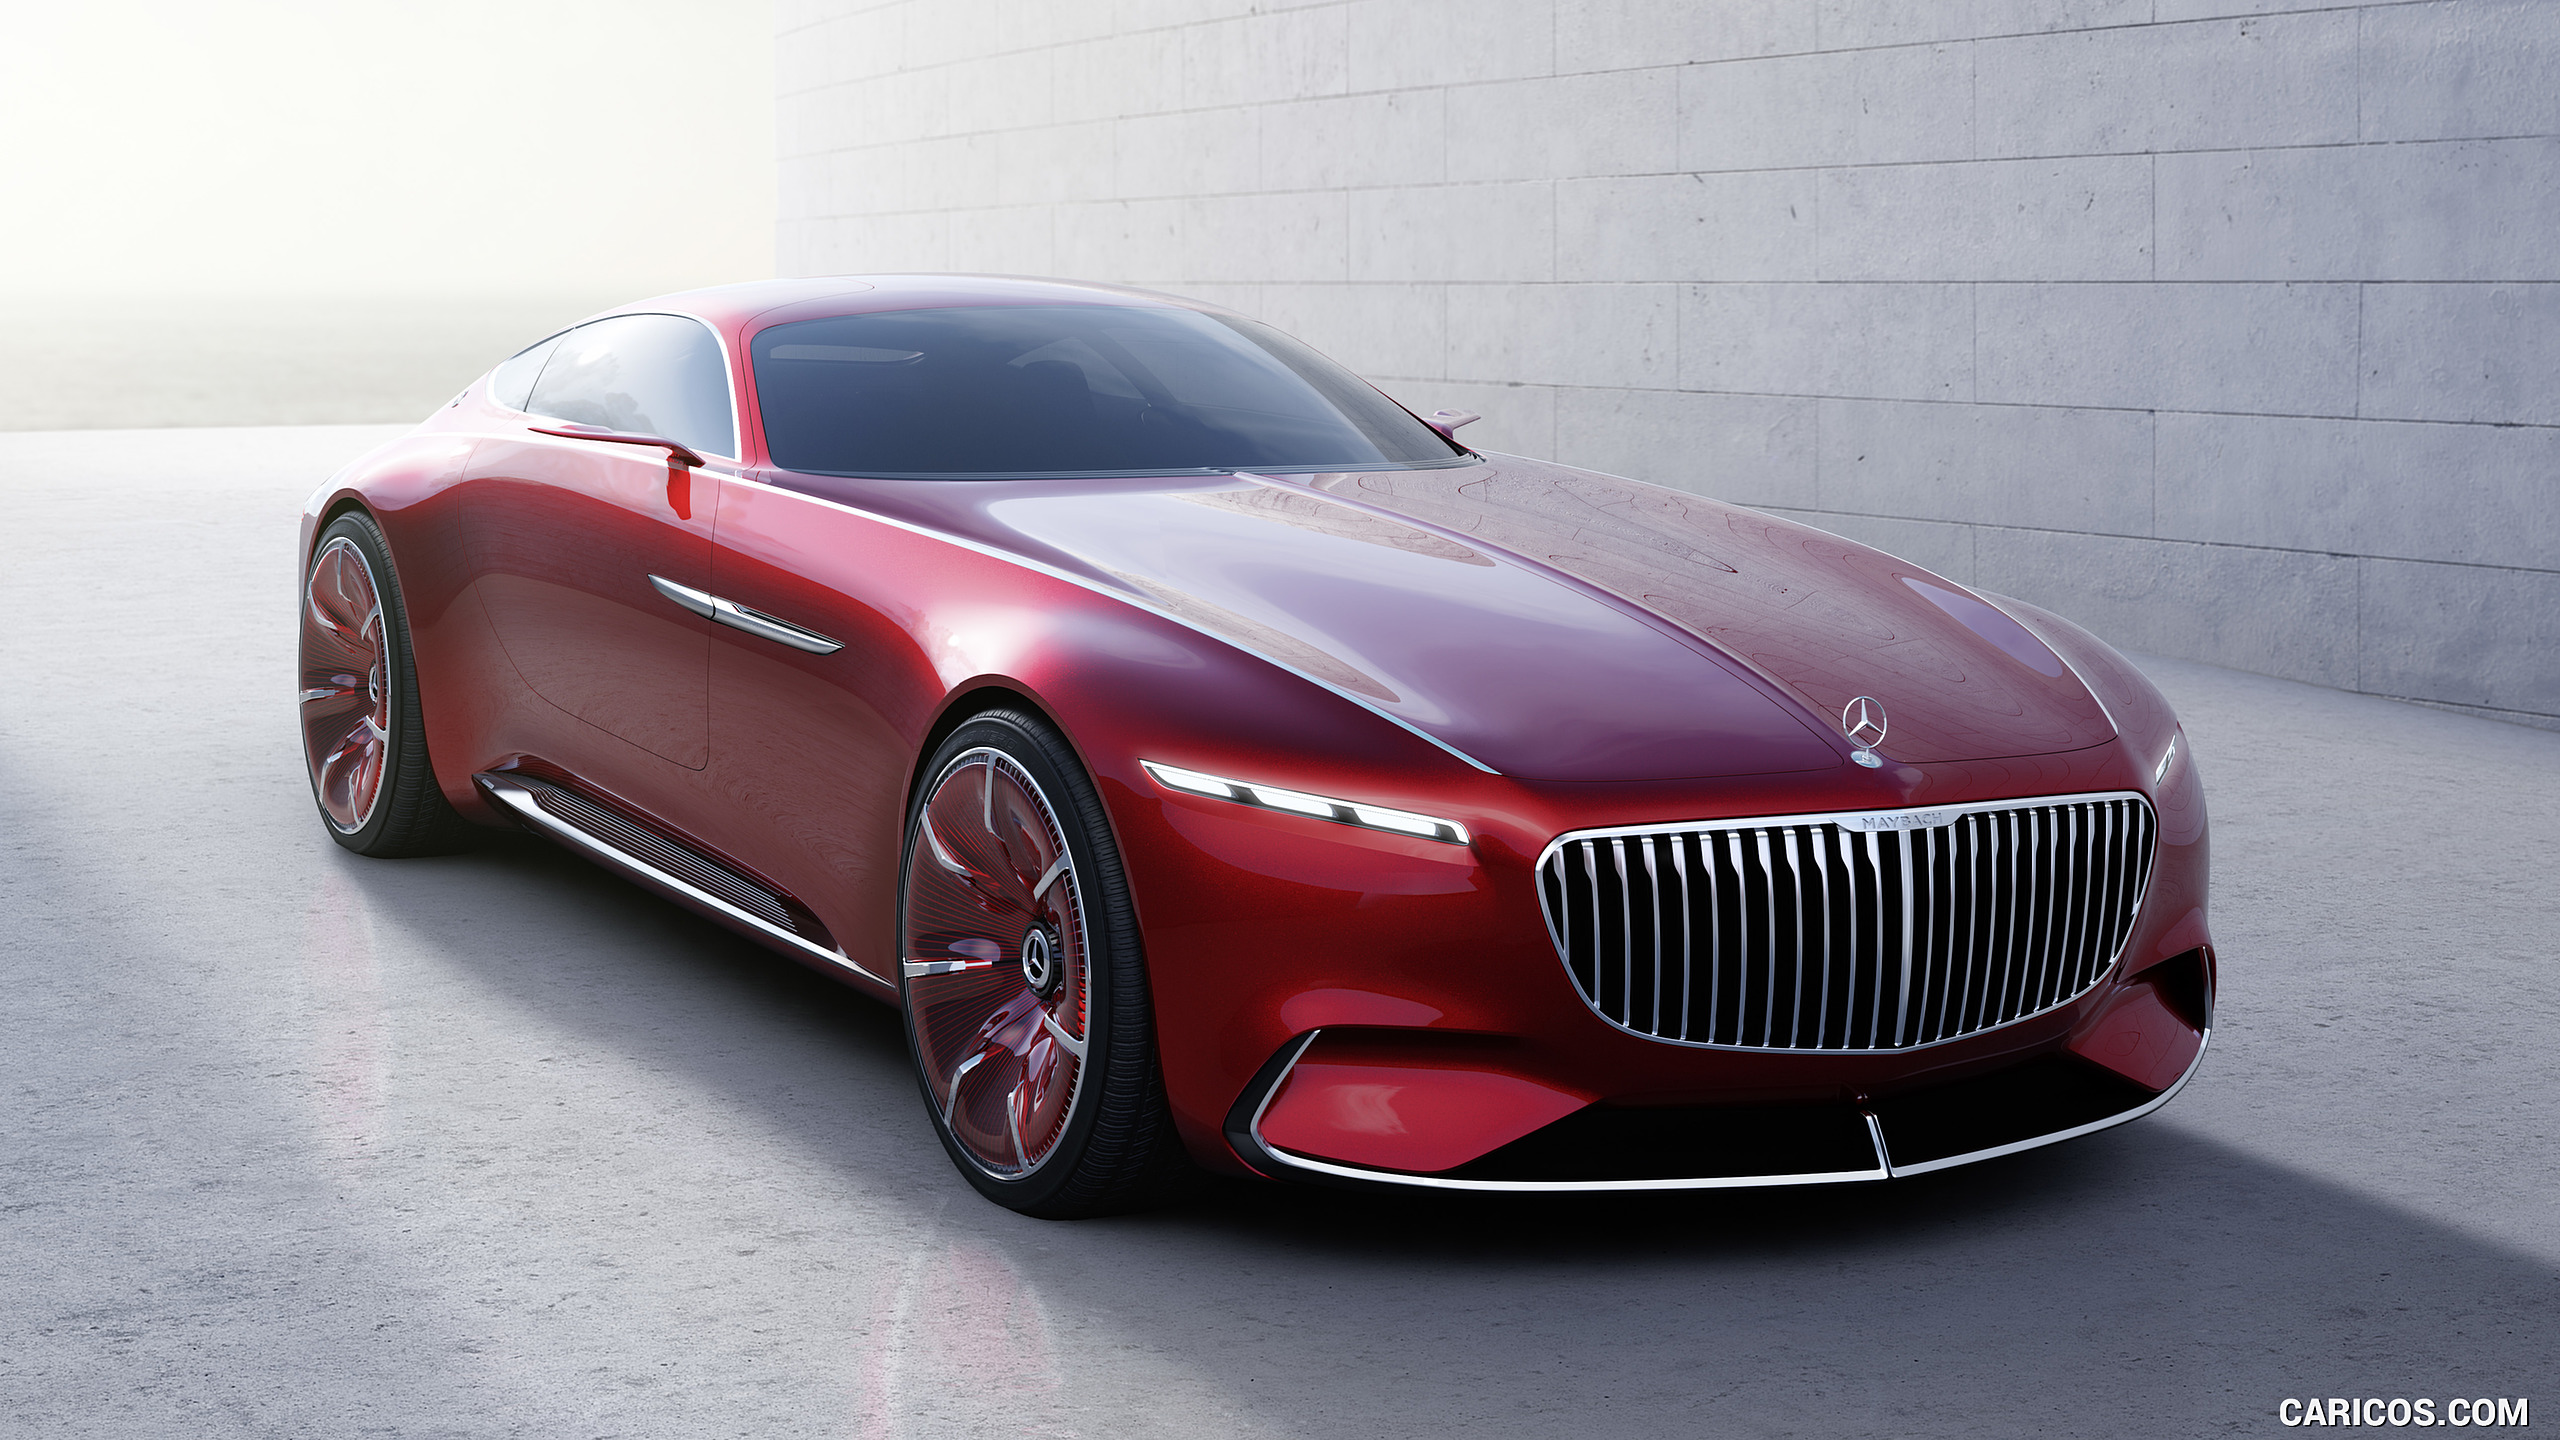 2016 Mercedes-Maybach 6 Concept - Front Three-Quarter, #1 of 31